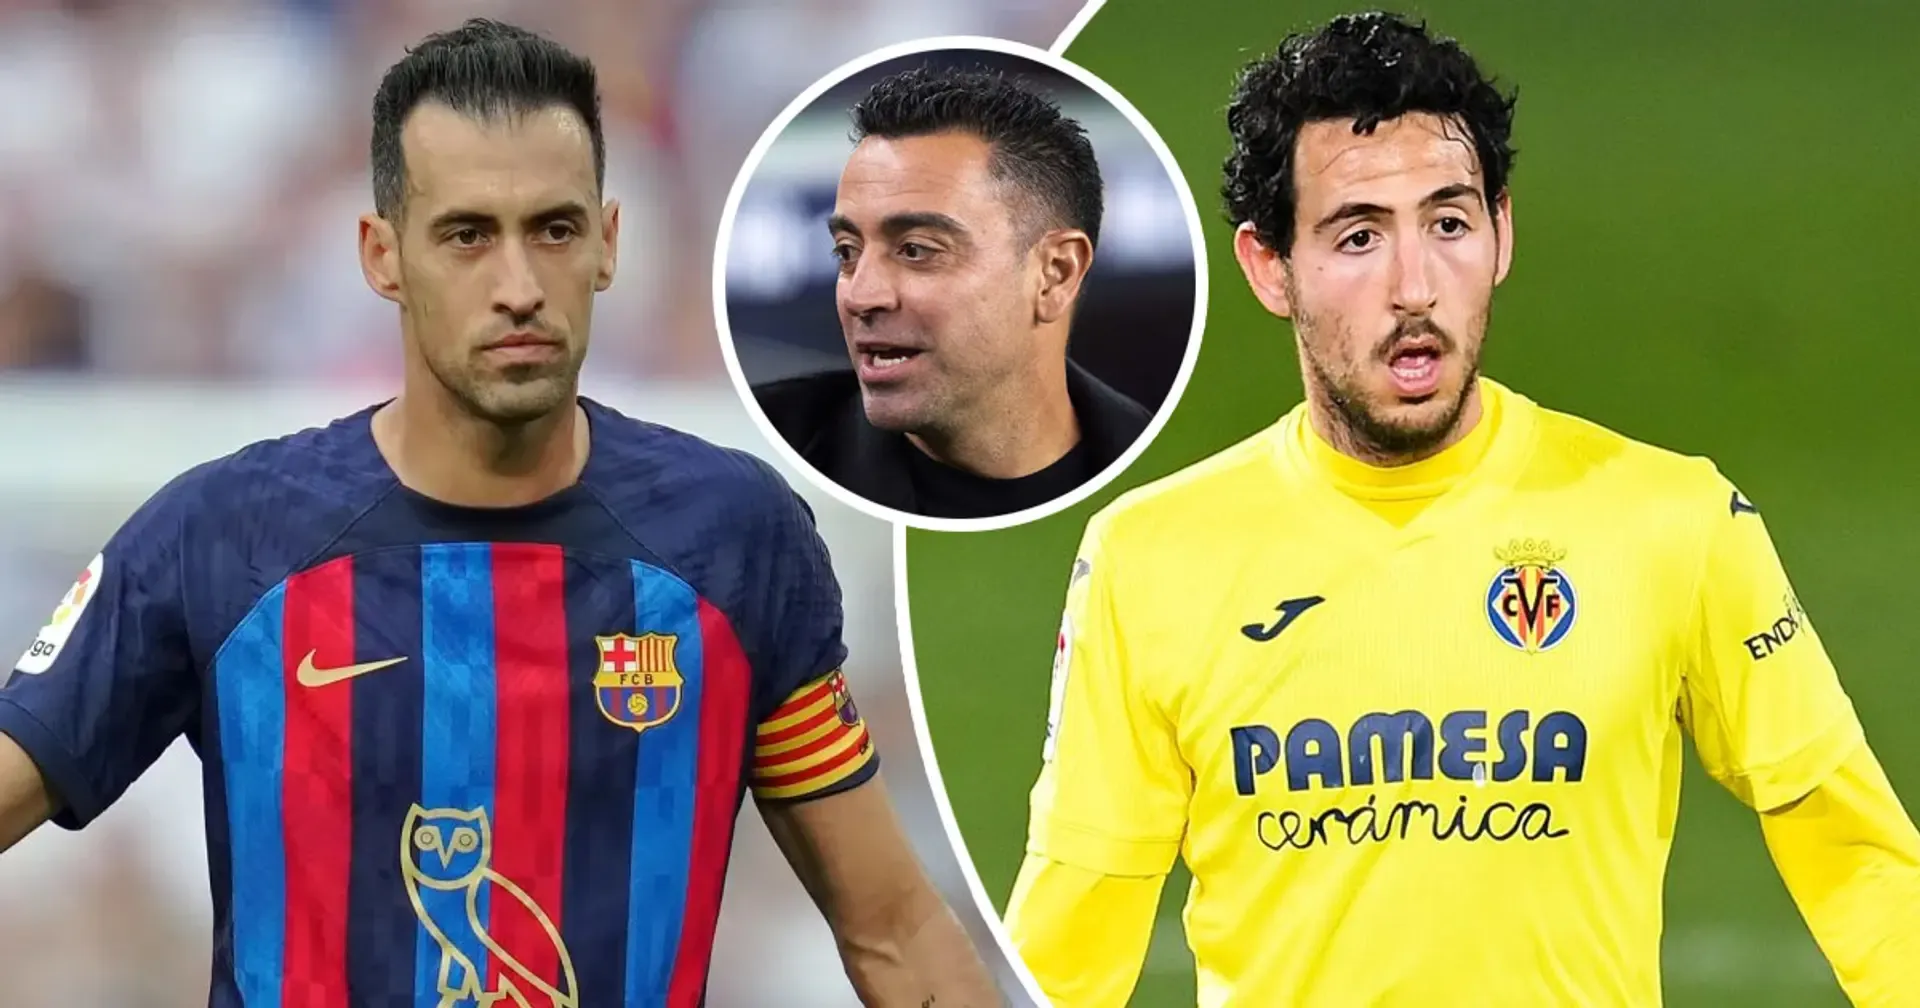 Xavi wants 33-year-old Parejo to replace Busquets next summer – top source